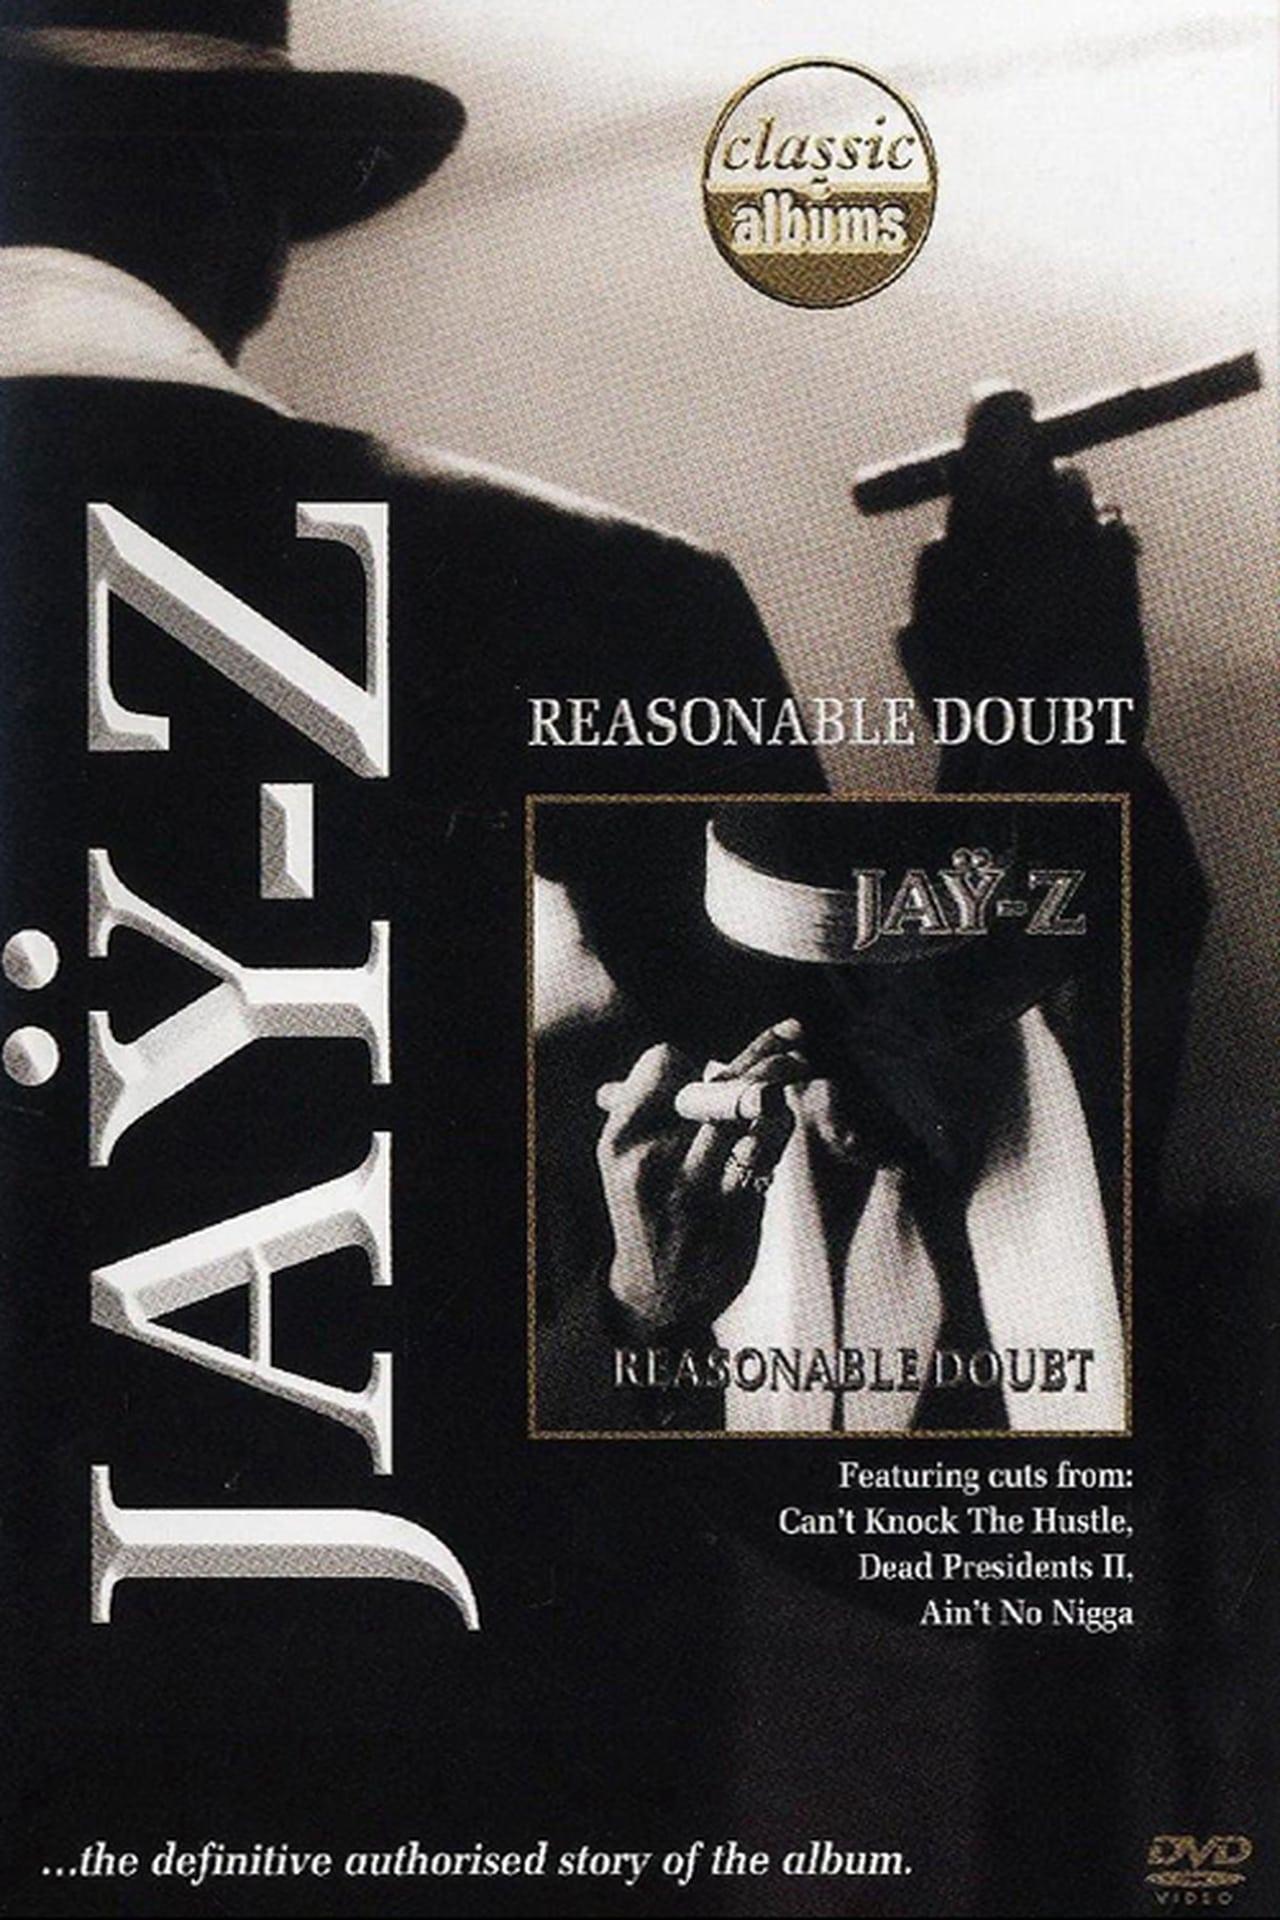 Classic Albums: Jay-Z - Reasonable Doubt poster